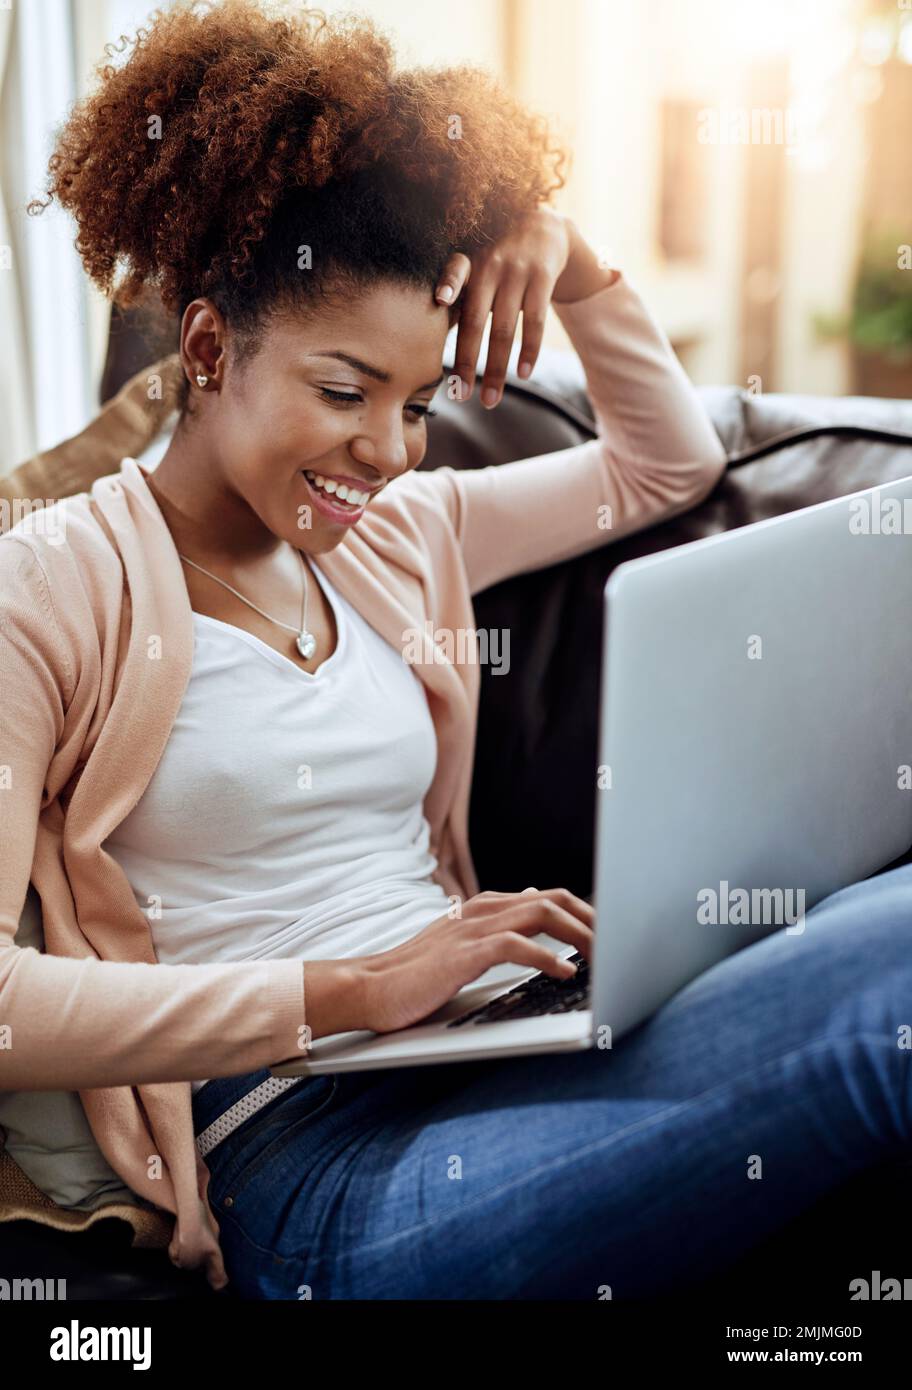 Comfy, connected and contented. a relaxed young woman using a laptop on the sofa at home. Stock Photo